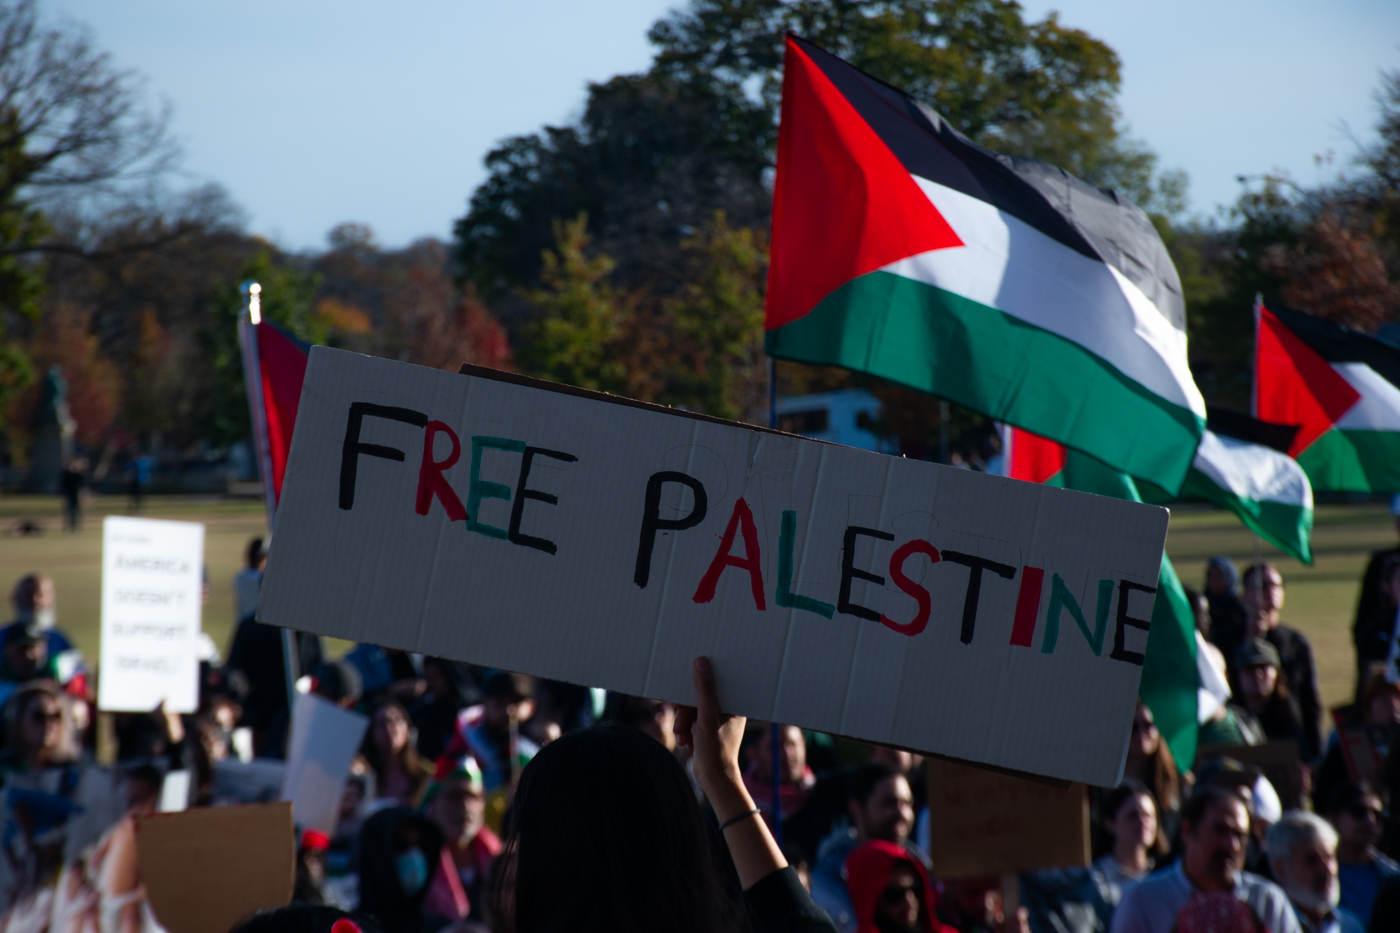 Protesters call for ceasefire in Middle East at Centennial Park - The ...